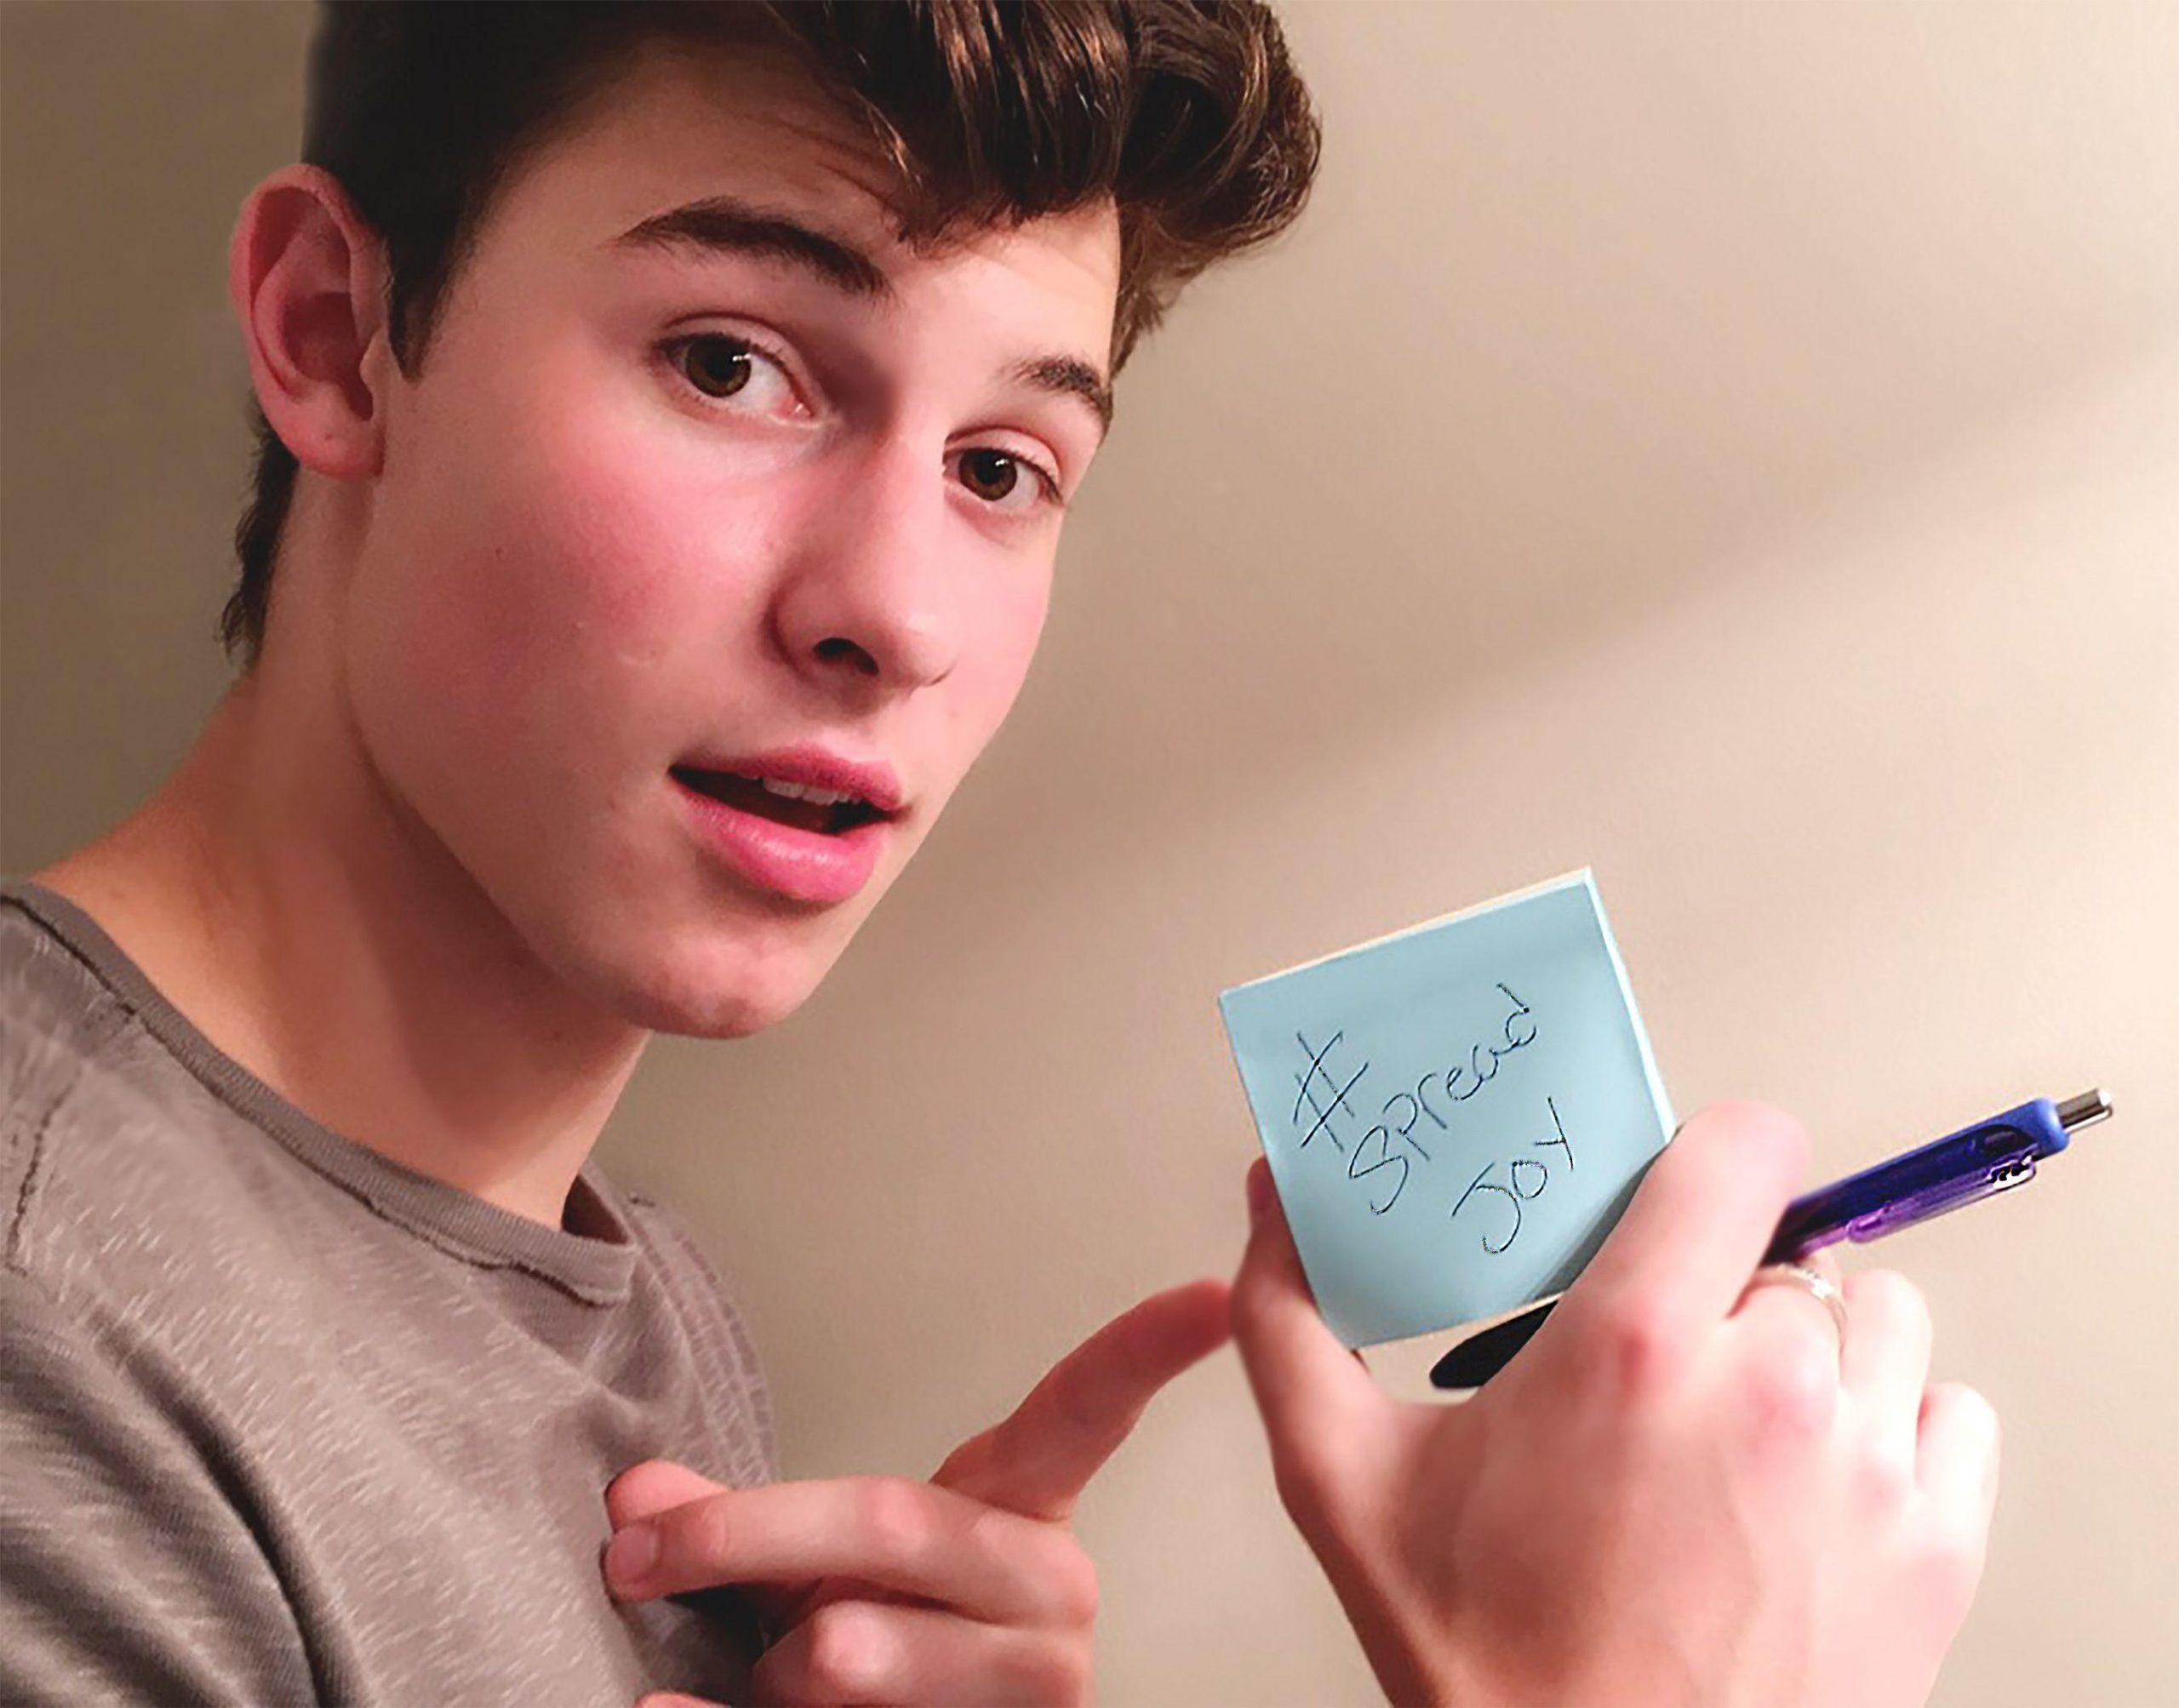 A selfie of a young man holding a pen and a post-it note with the hashtag #spreadjoy. - Shawn Mendes